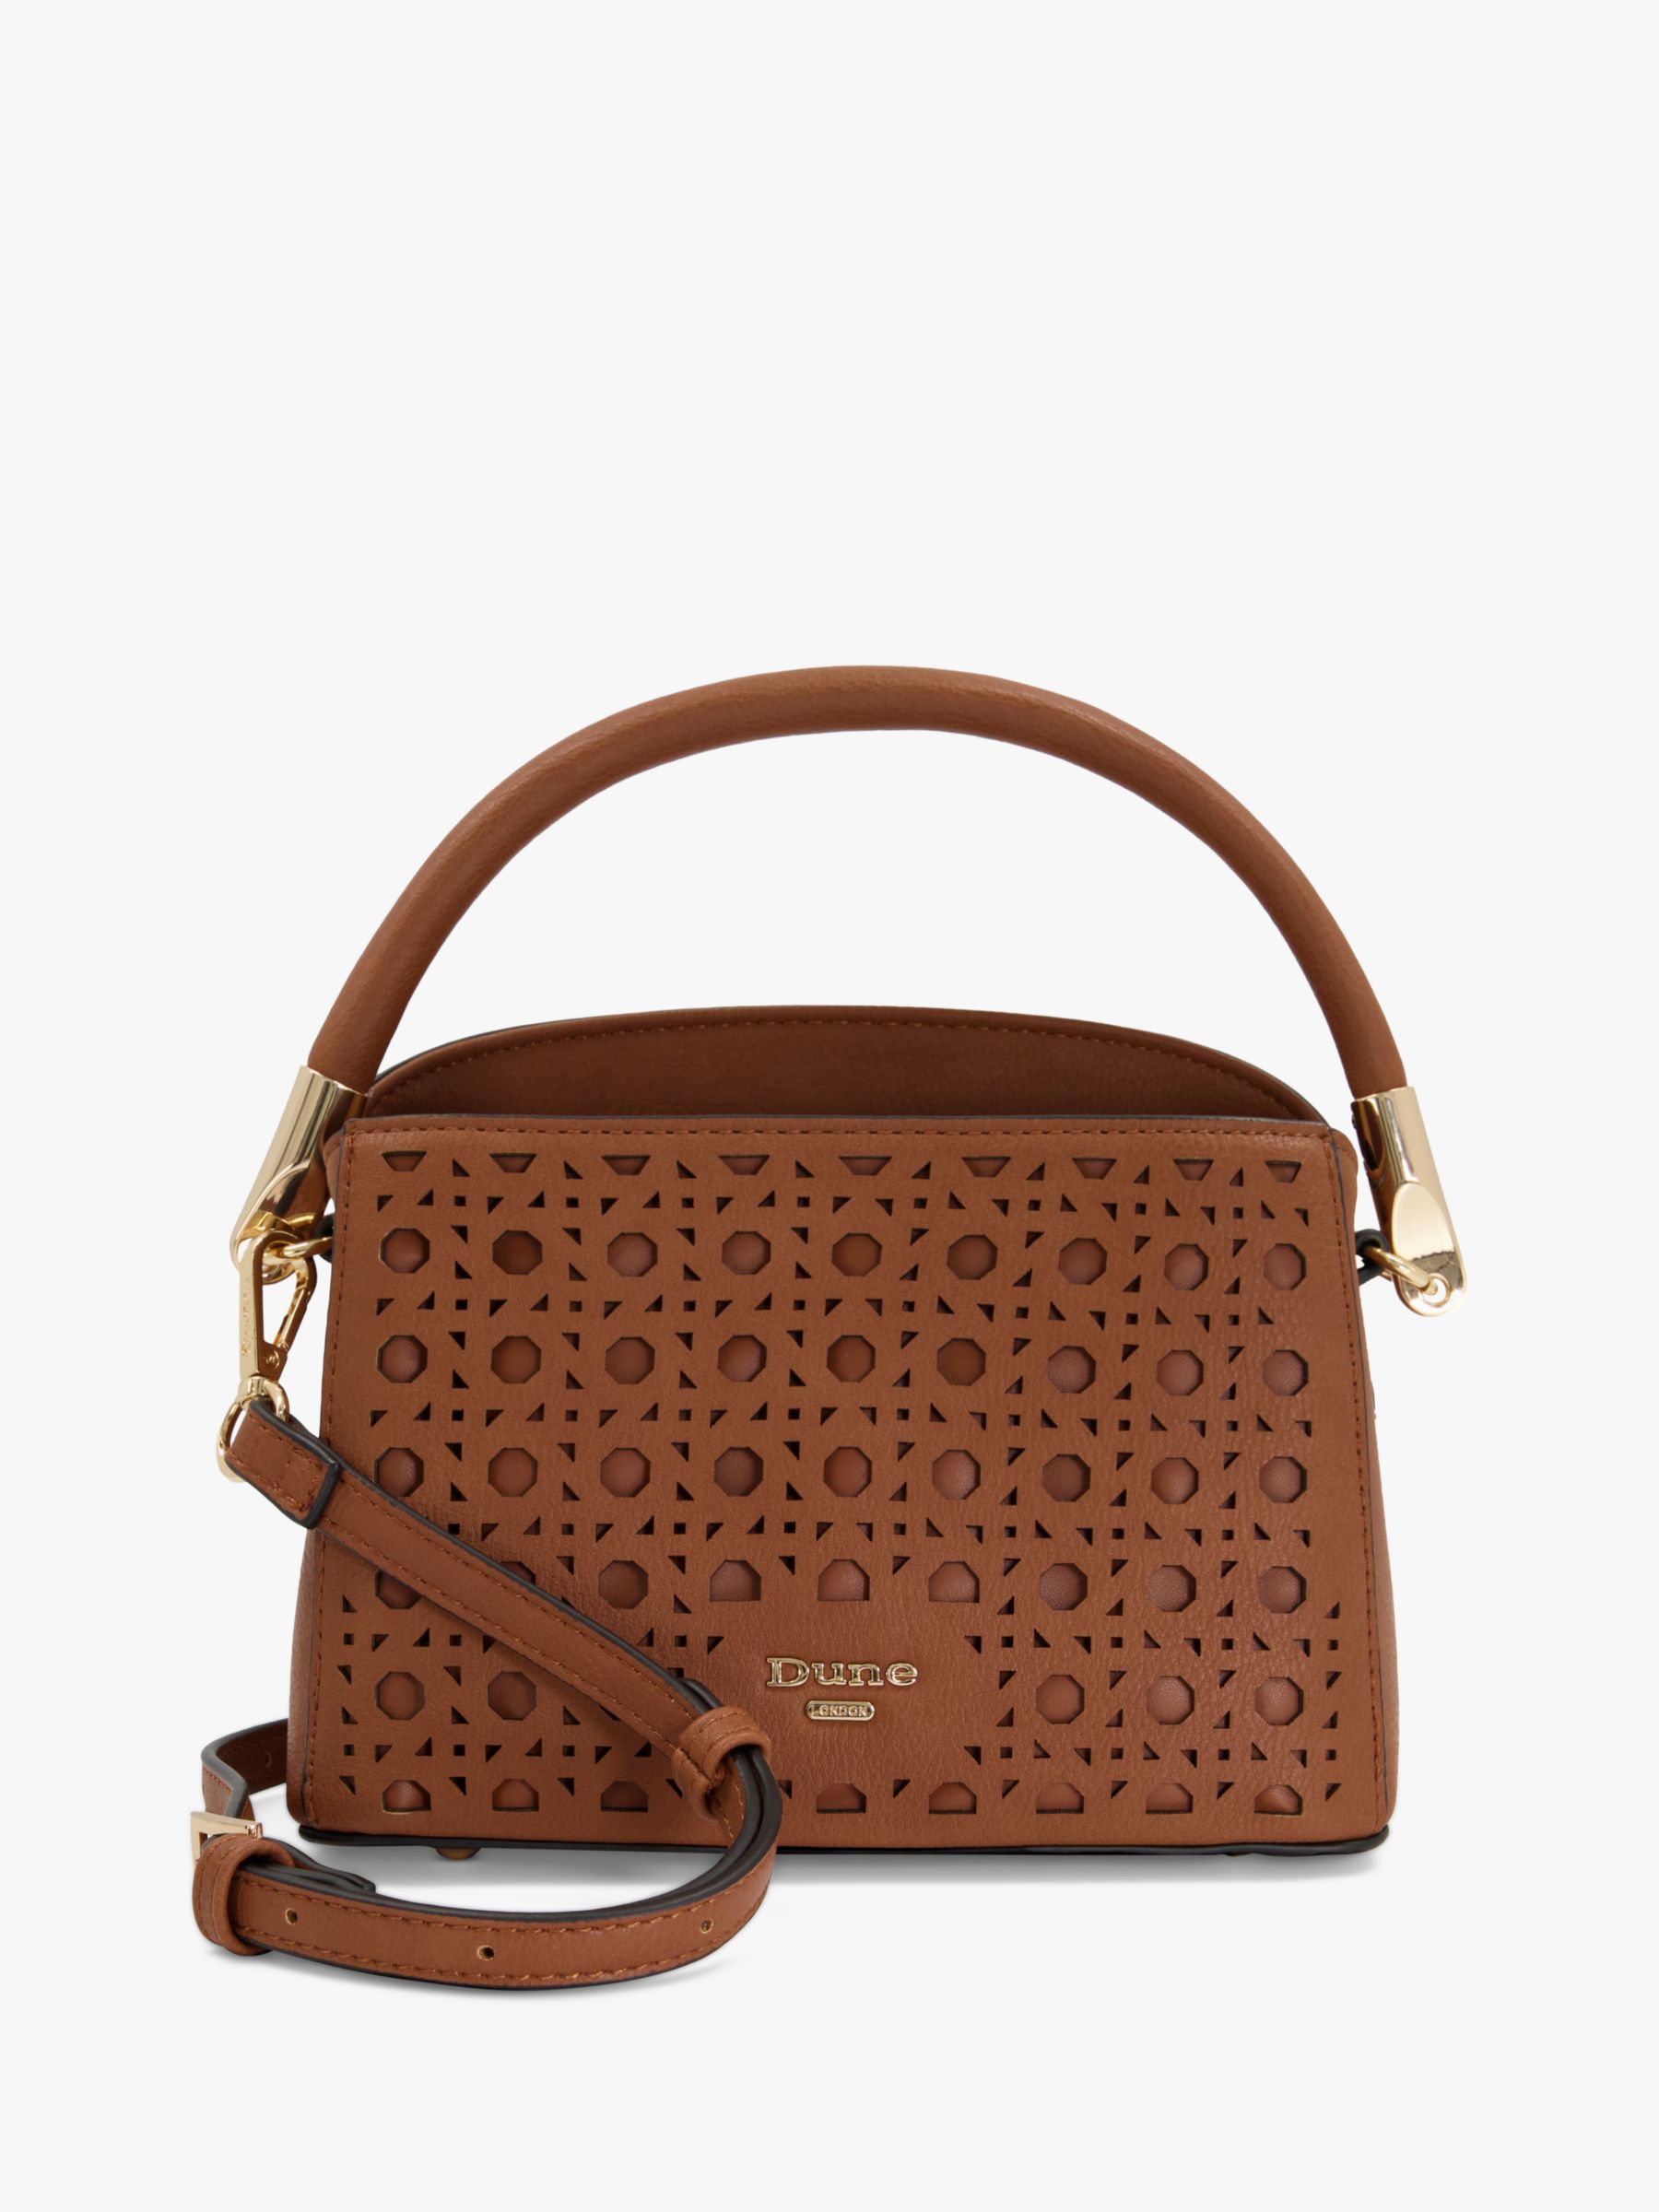 TKMAXX June New Collection 2021 -Discounted Designer BAGS!! 